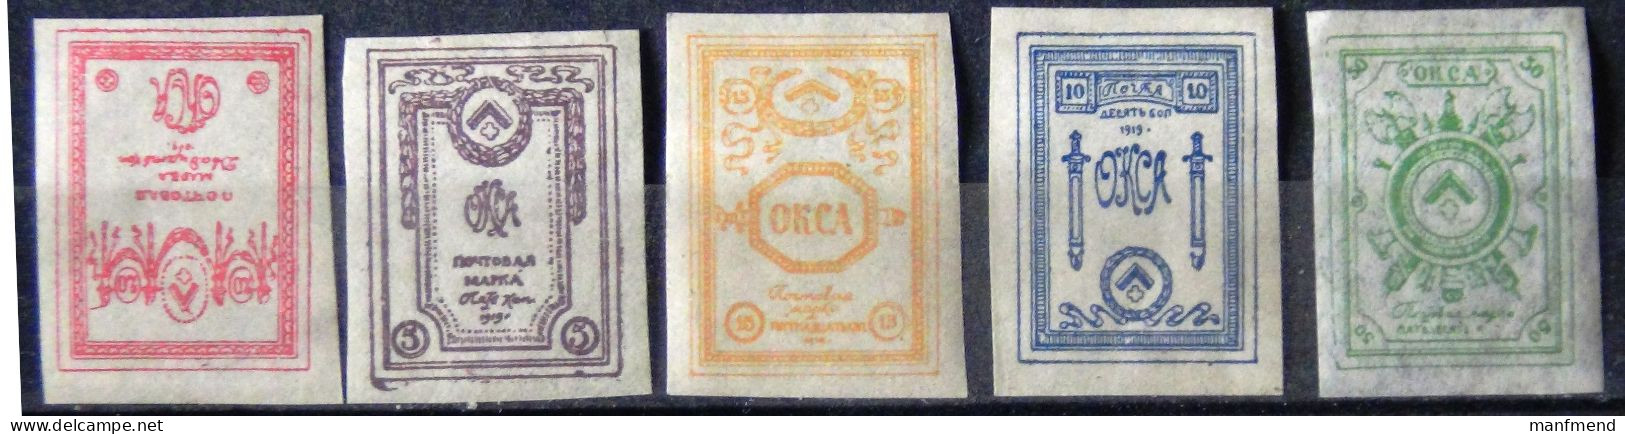 Russia - Civil War Army Of The North OKSA Corp - 1919 -  Yt: 1-5*MNH - Look Scan - 1919-20 Occupation: Great Britain